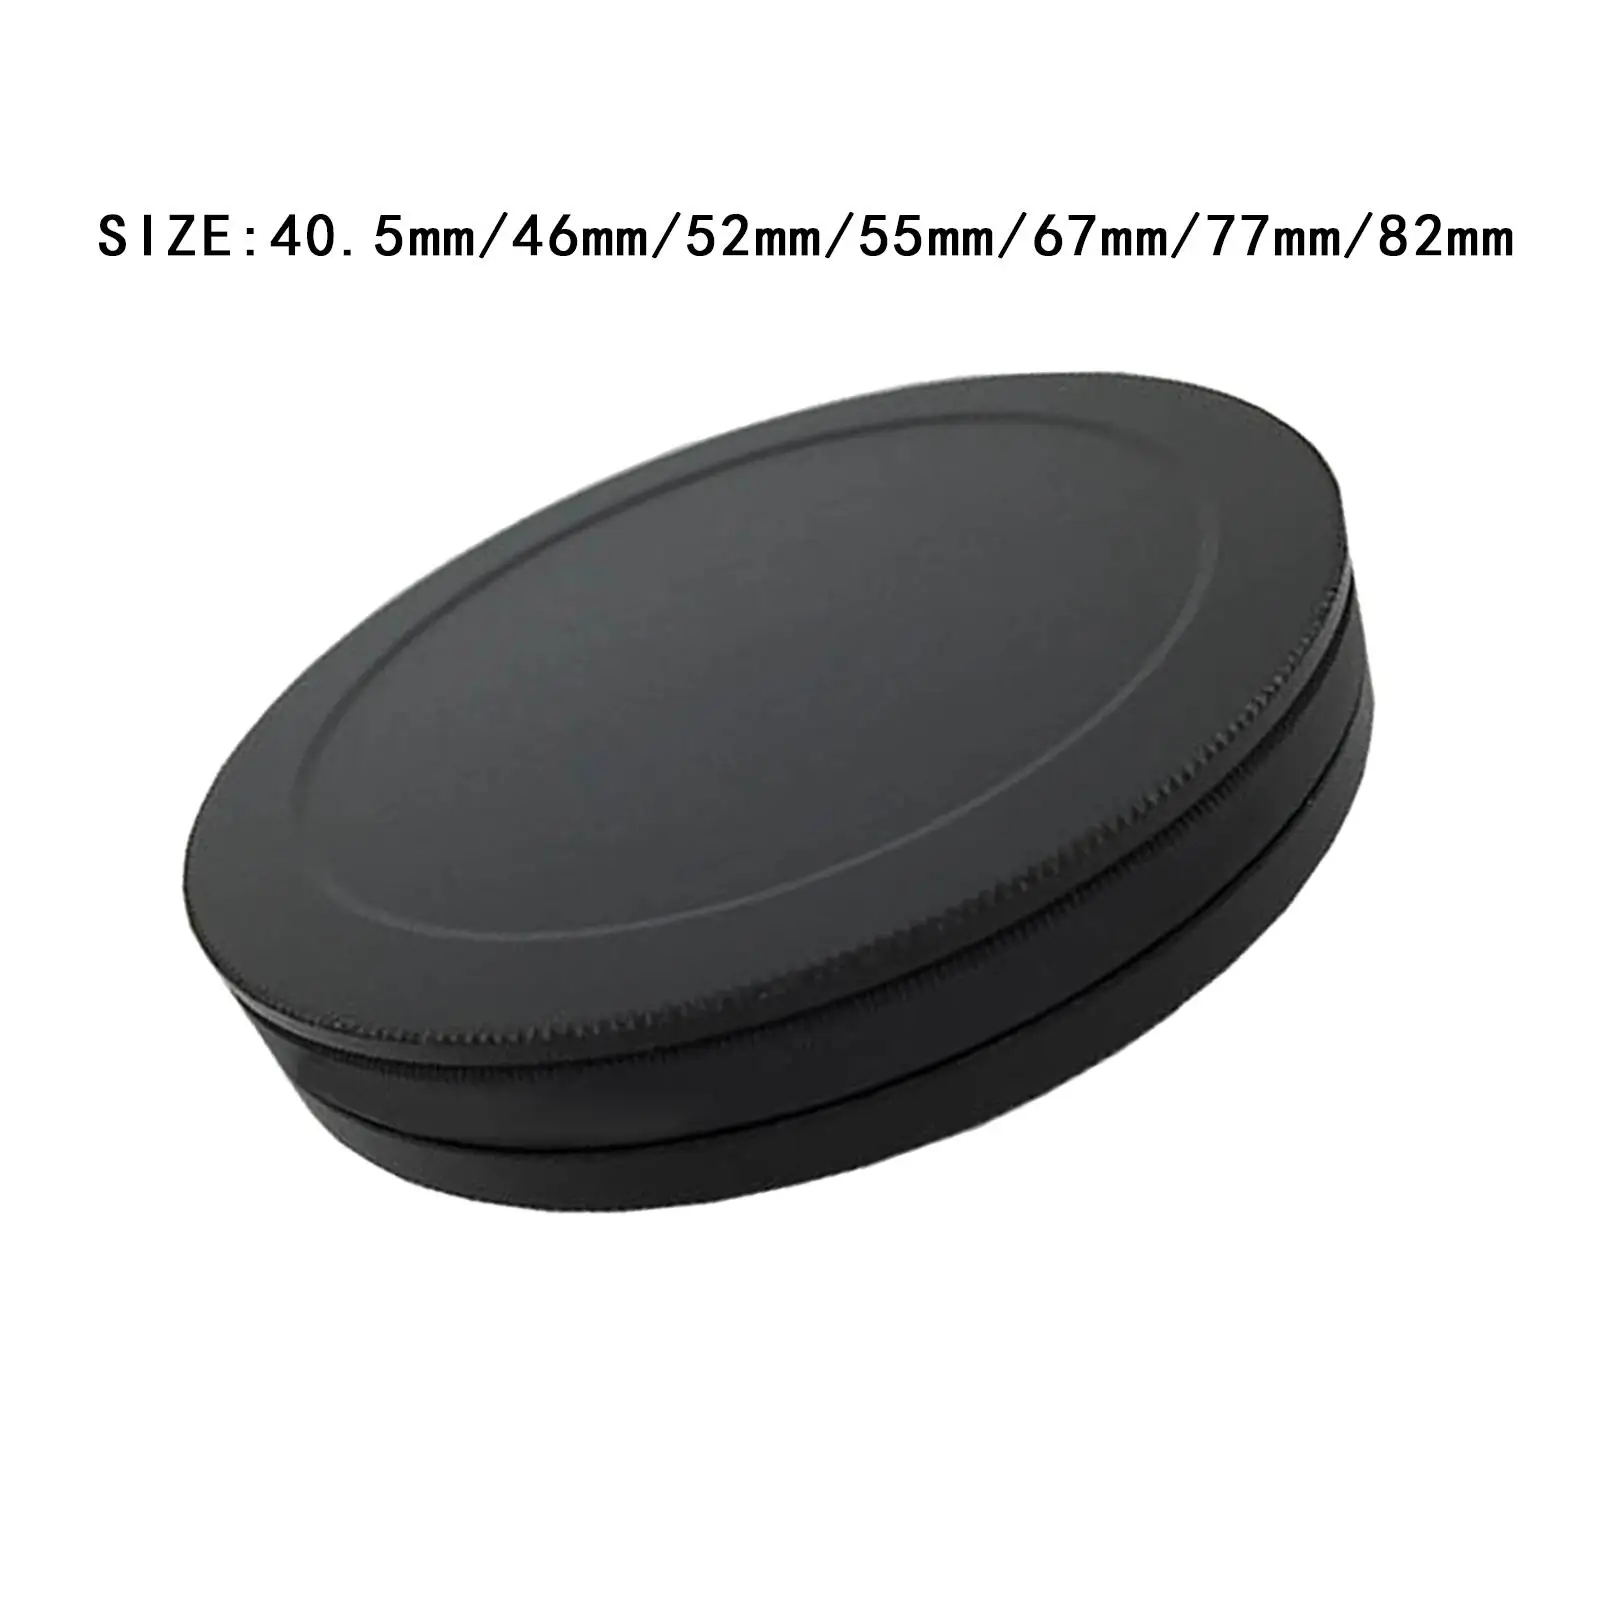 2 Pieces Screw in Lens Filter Stack Caps Anti Scratched Slim Filters Case Front Rear Case for Lens Filter Metal Box Storage Caps